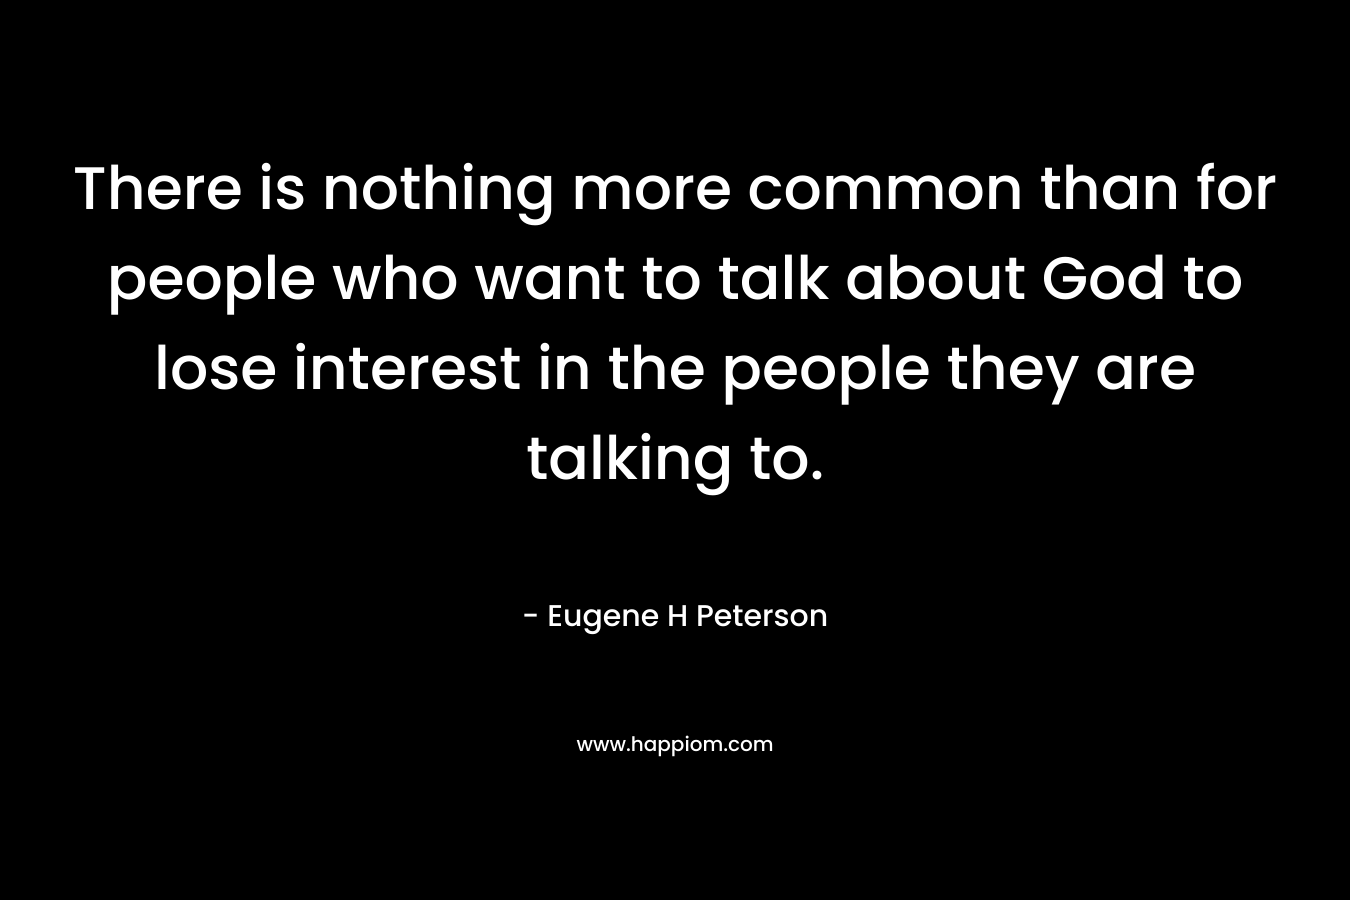 There is nothing more common than for people who want to talk about God to lose interest in the people they are talking to. – Eugene H Peterson